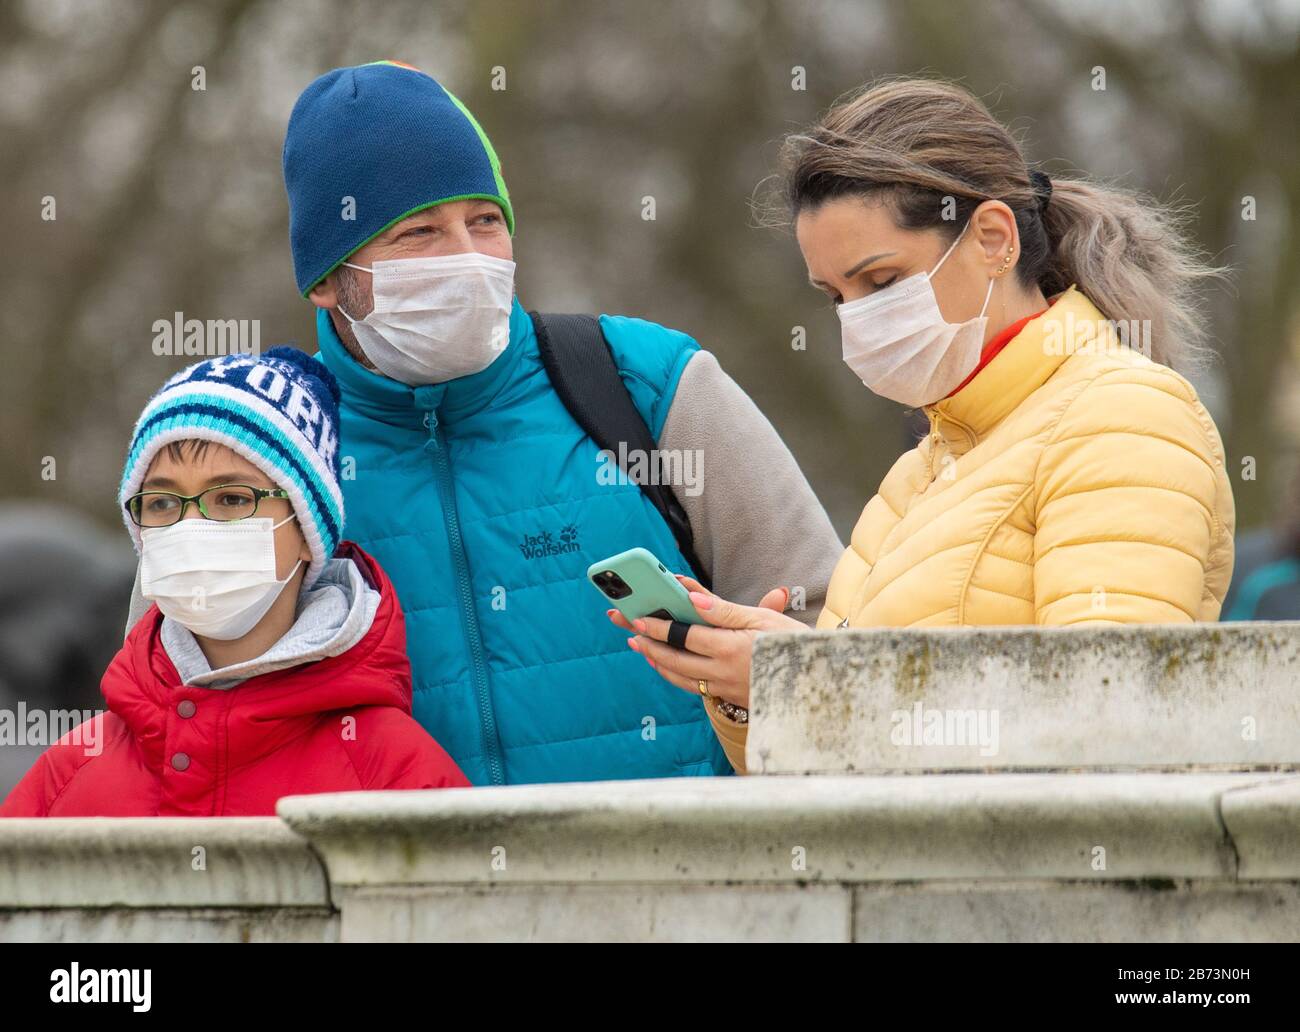 People wearing protective face masks watch the Changing of the Guard ceremony outside Buckingham Palace, London, the day after the Prime Minister said that Covid-19 'is the worst public health crisis for a generation', and the government's top scientist warned that up to 10,000 people in the UK are already infected. PA Photo. Picture date: Friday March 13, 2020. See PA story HEALTH Coronavirus. Photo credit should read: Dominic Lipinski/PA Wire Stock Photo